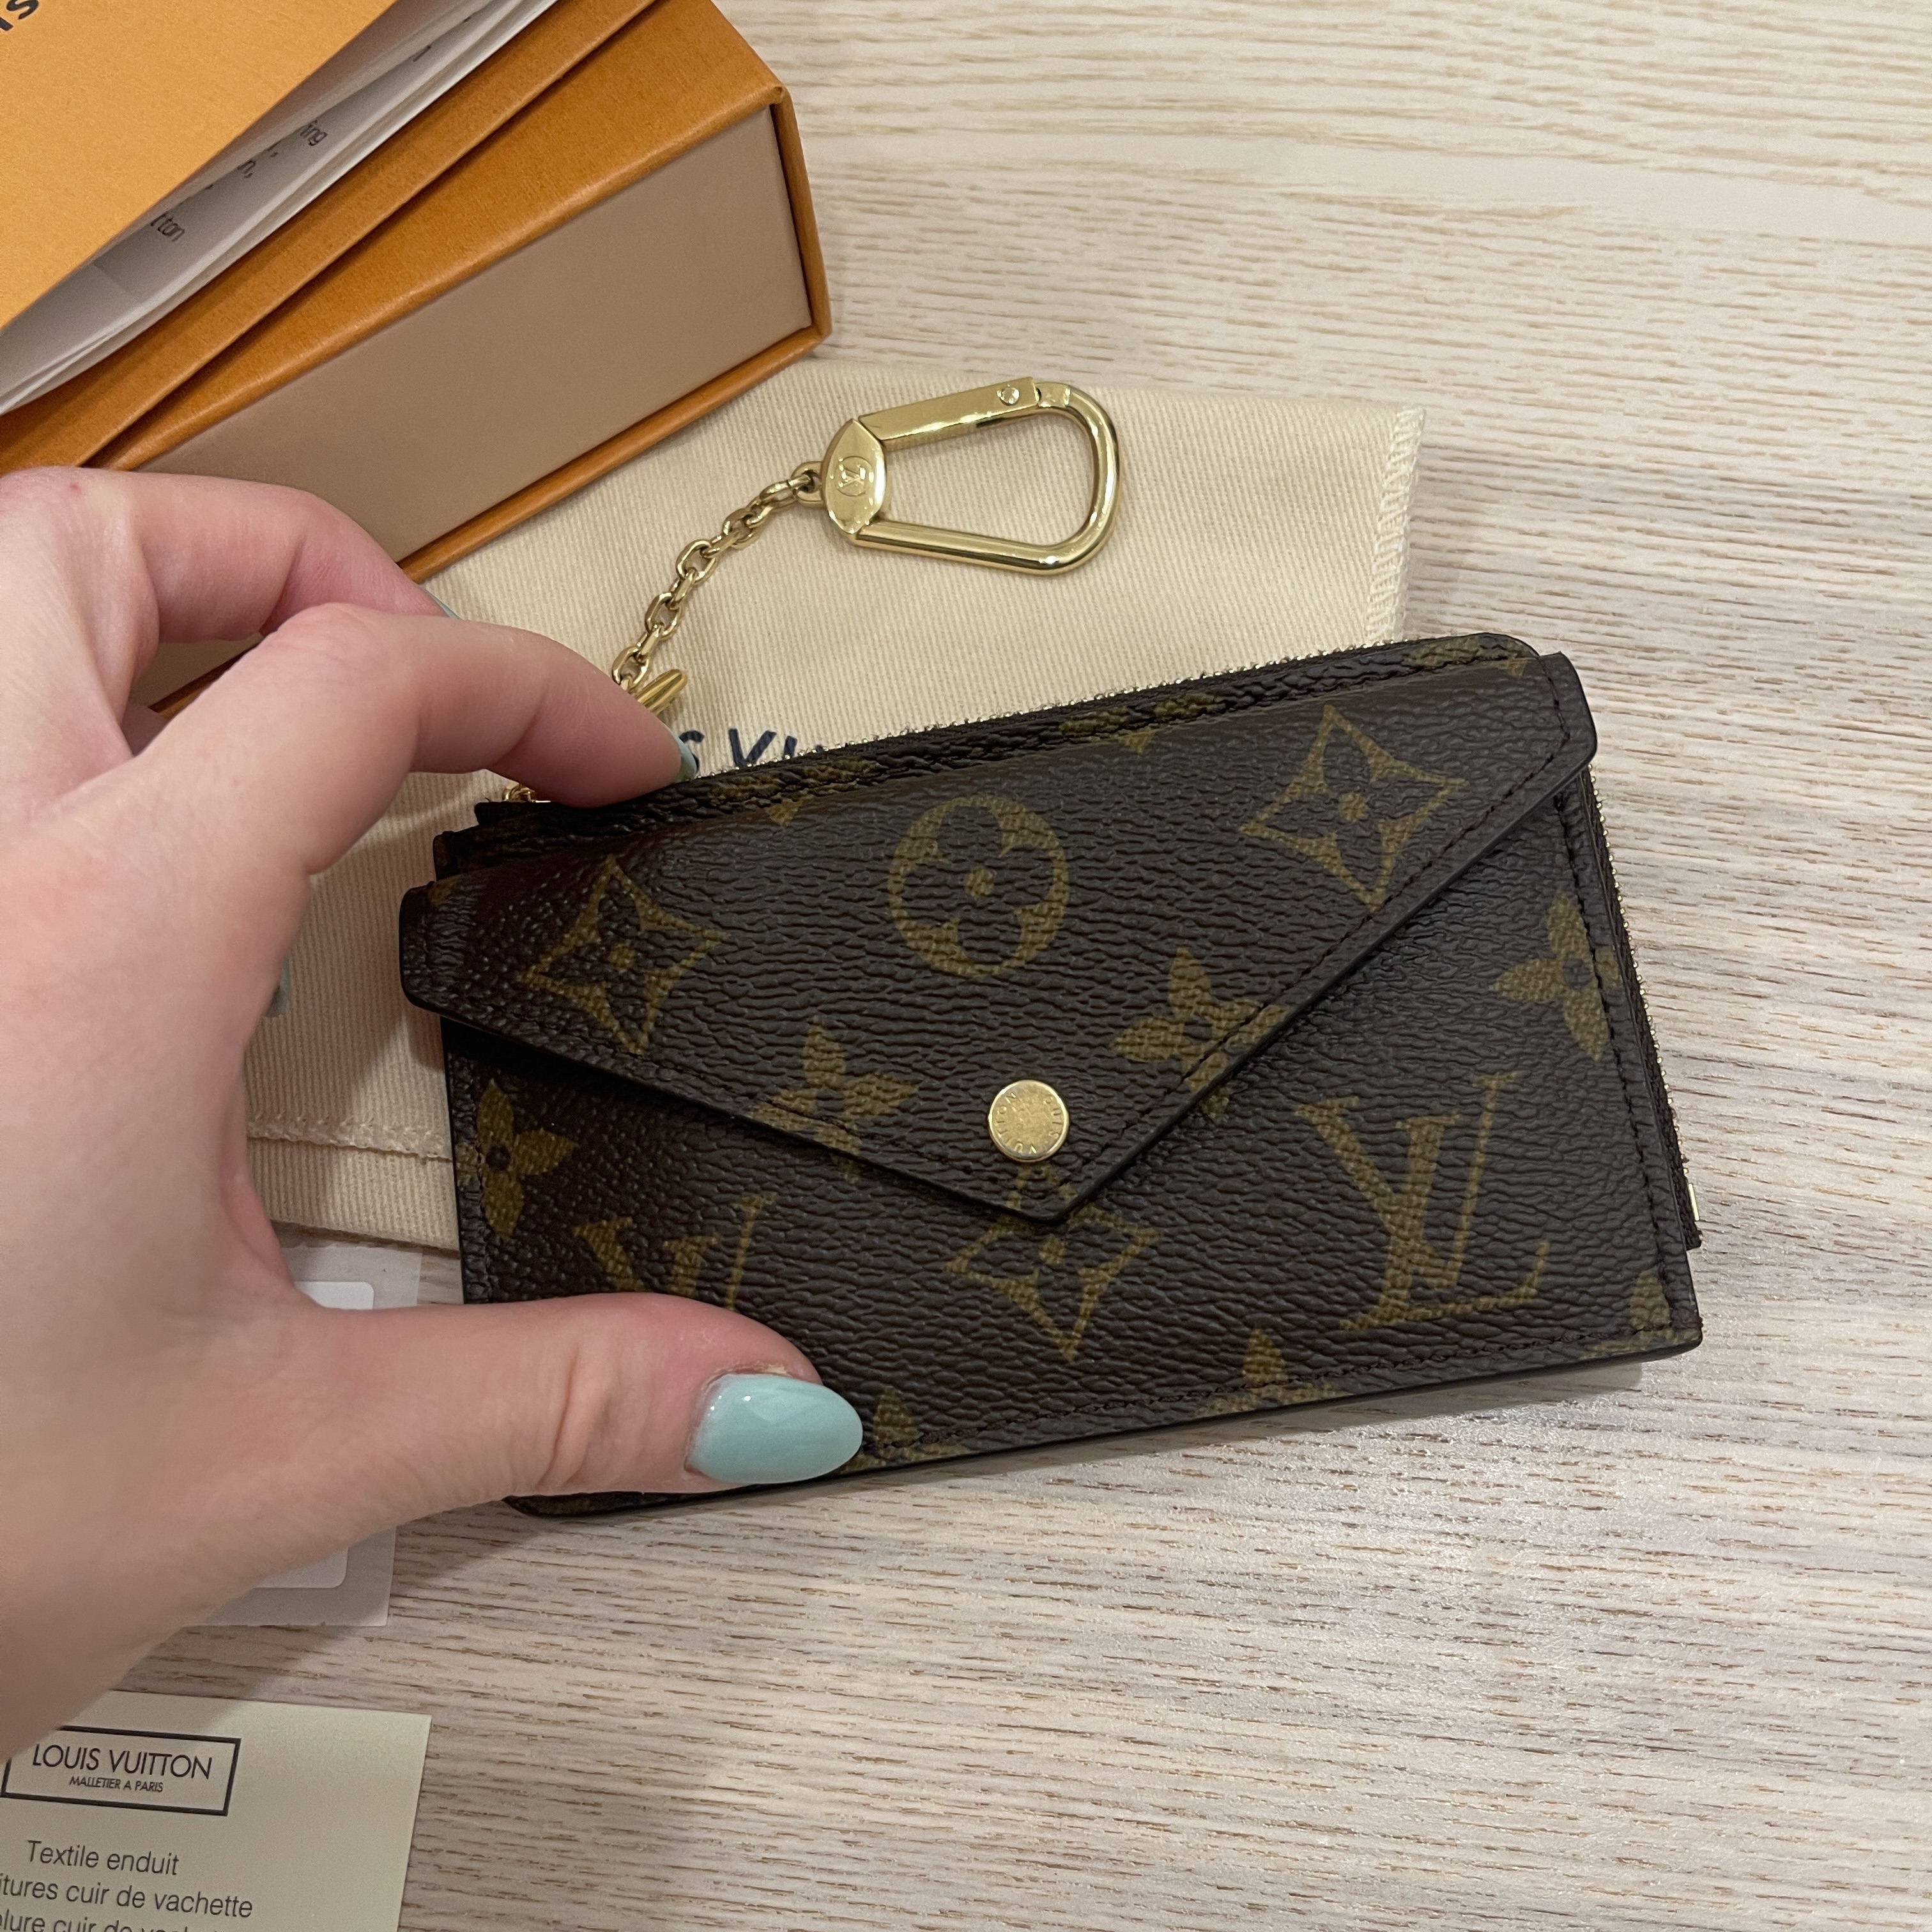 HER Authentic - Brand New / Sold out - Louis Vuitton Card Holder Recto Verso  is on our website for $650. Perfect every day wallet!